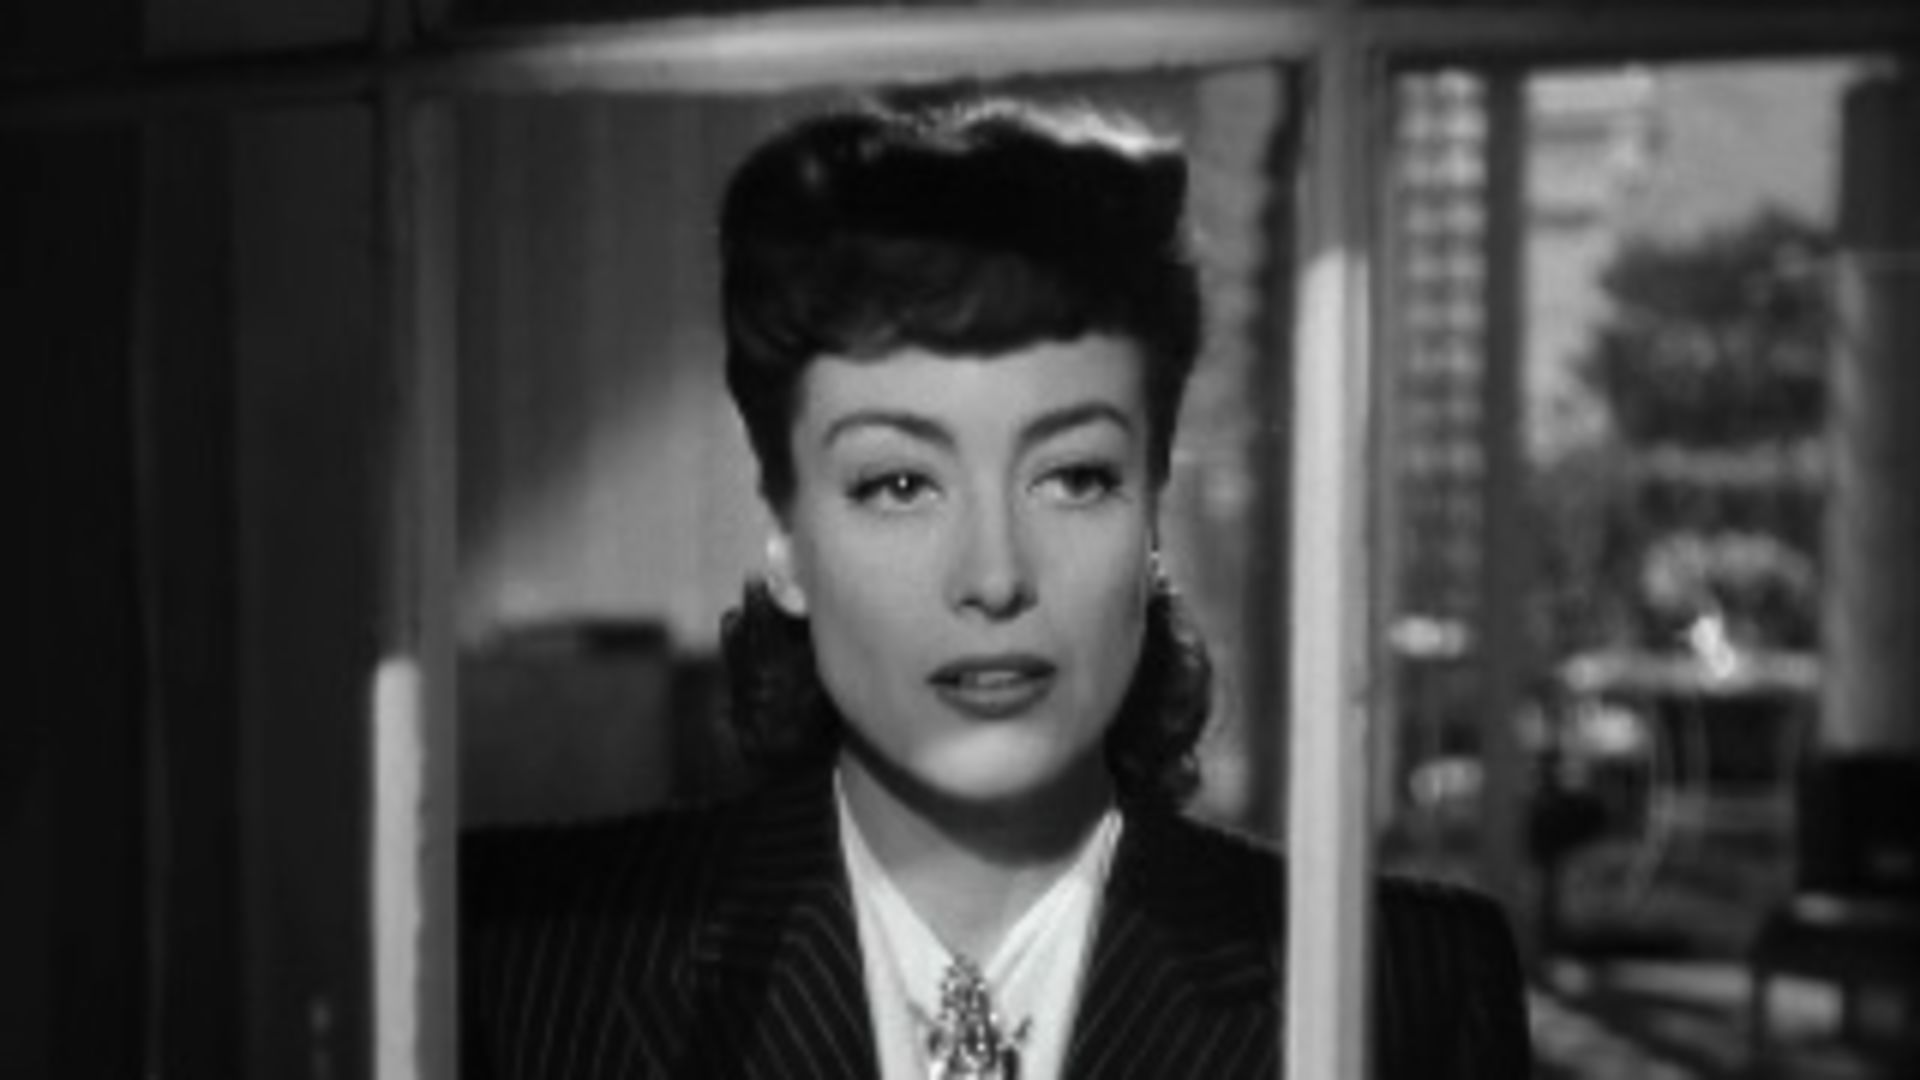 Watch The Best of Joan Crawford. Commentary. The New Yorker